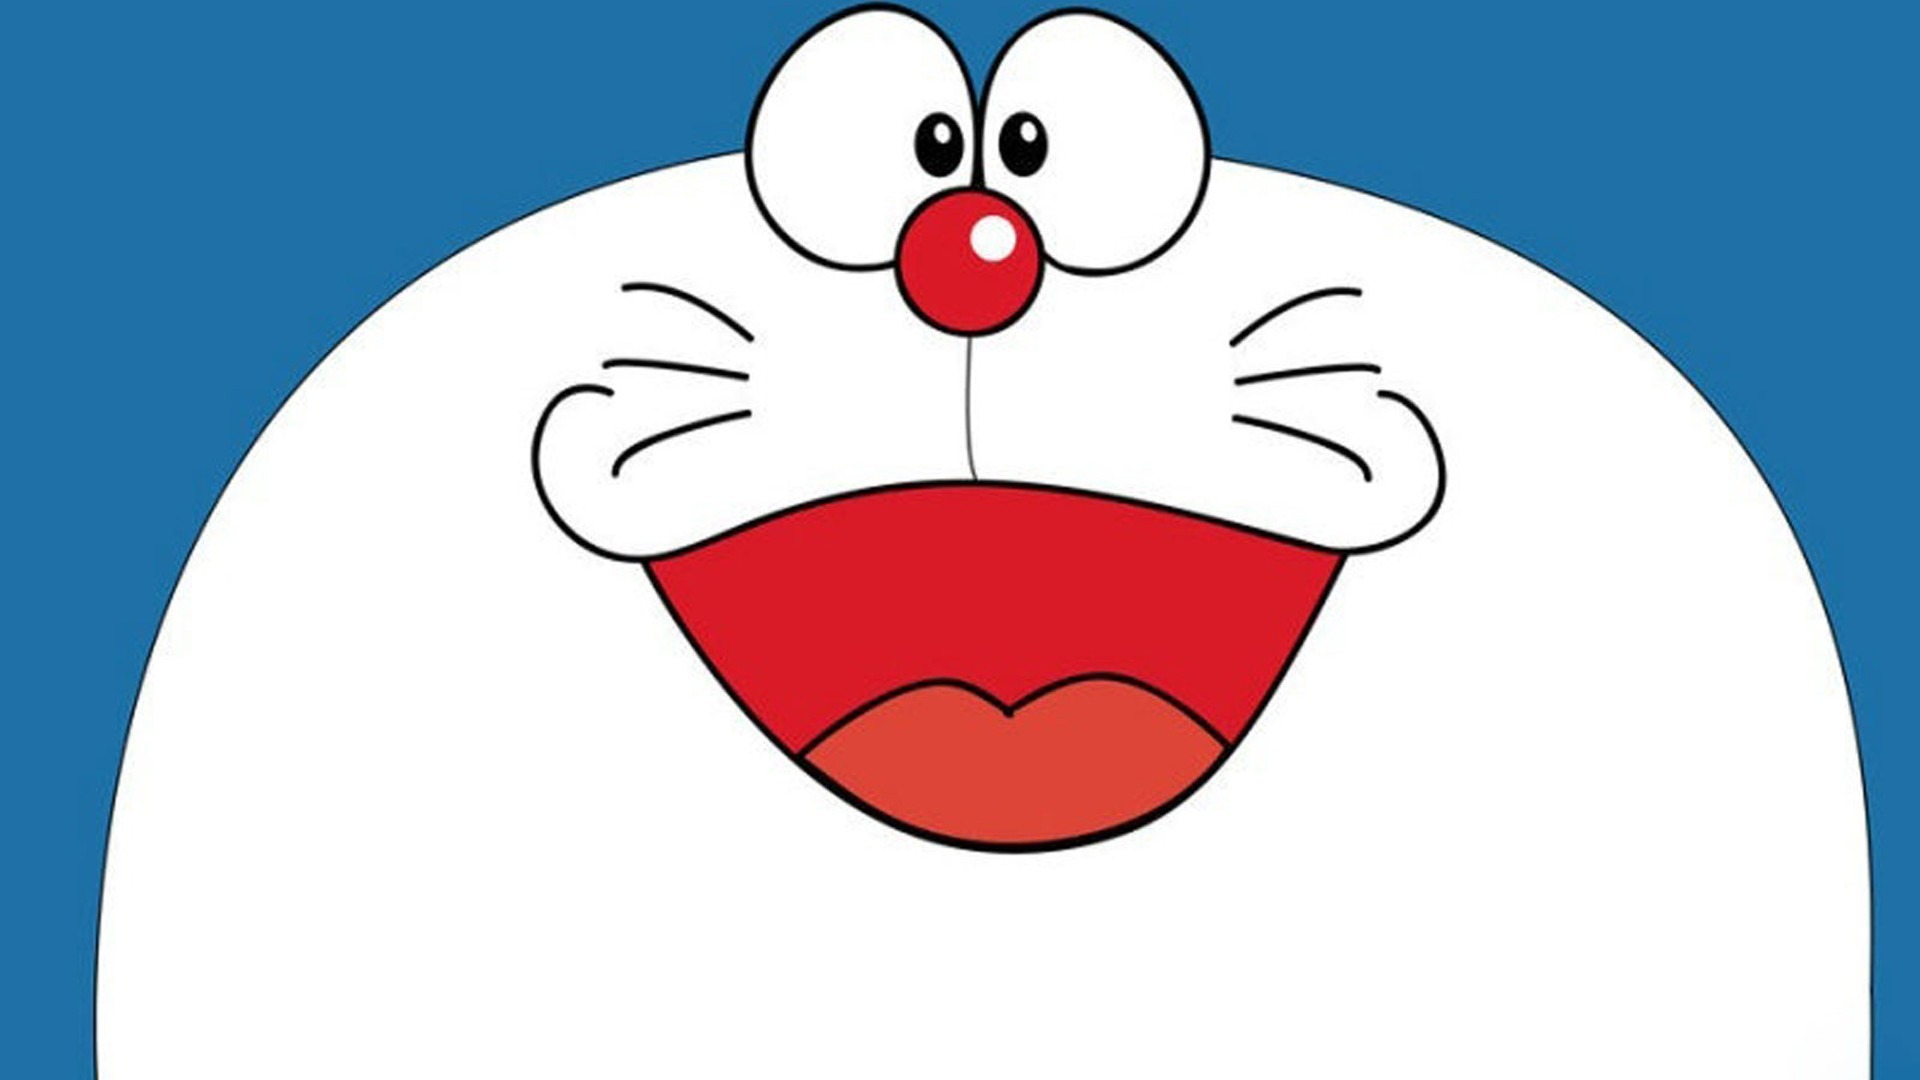 Free download Doraemon 1080p Wallpaper High Definition High Quality  Widescreen [1920x1080] for your Desktop, Mobile & Tablet | Explore 75+ Doraemon  Wallpapers | Doraemon 3d Wallpaper 2015, Wallpapers Doraemon, Doraemon  Wallpaper